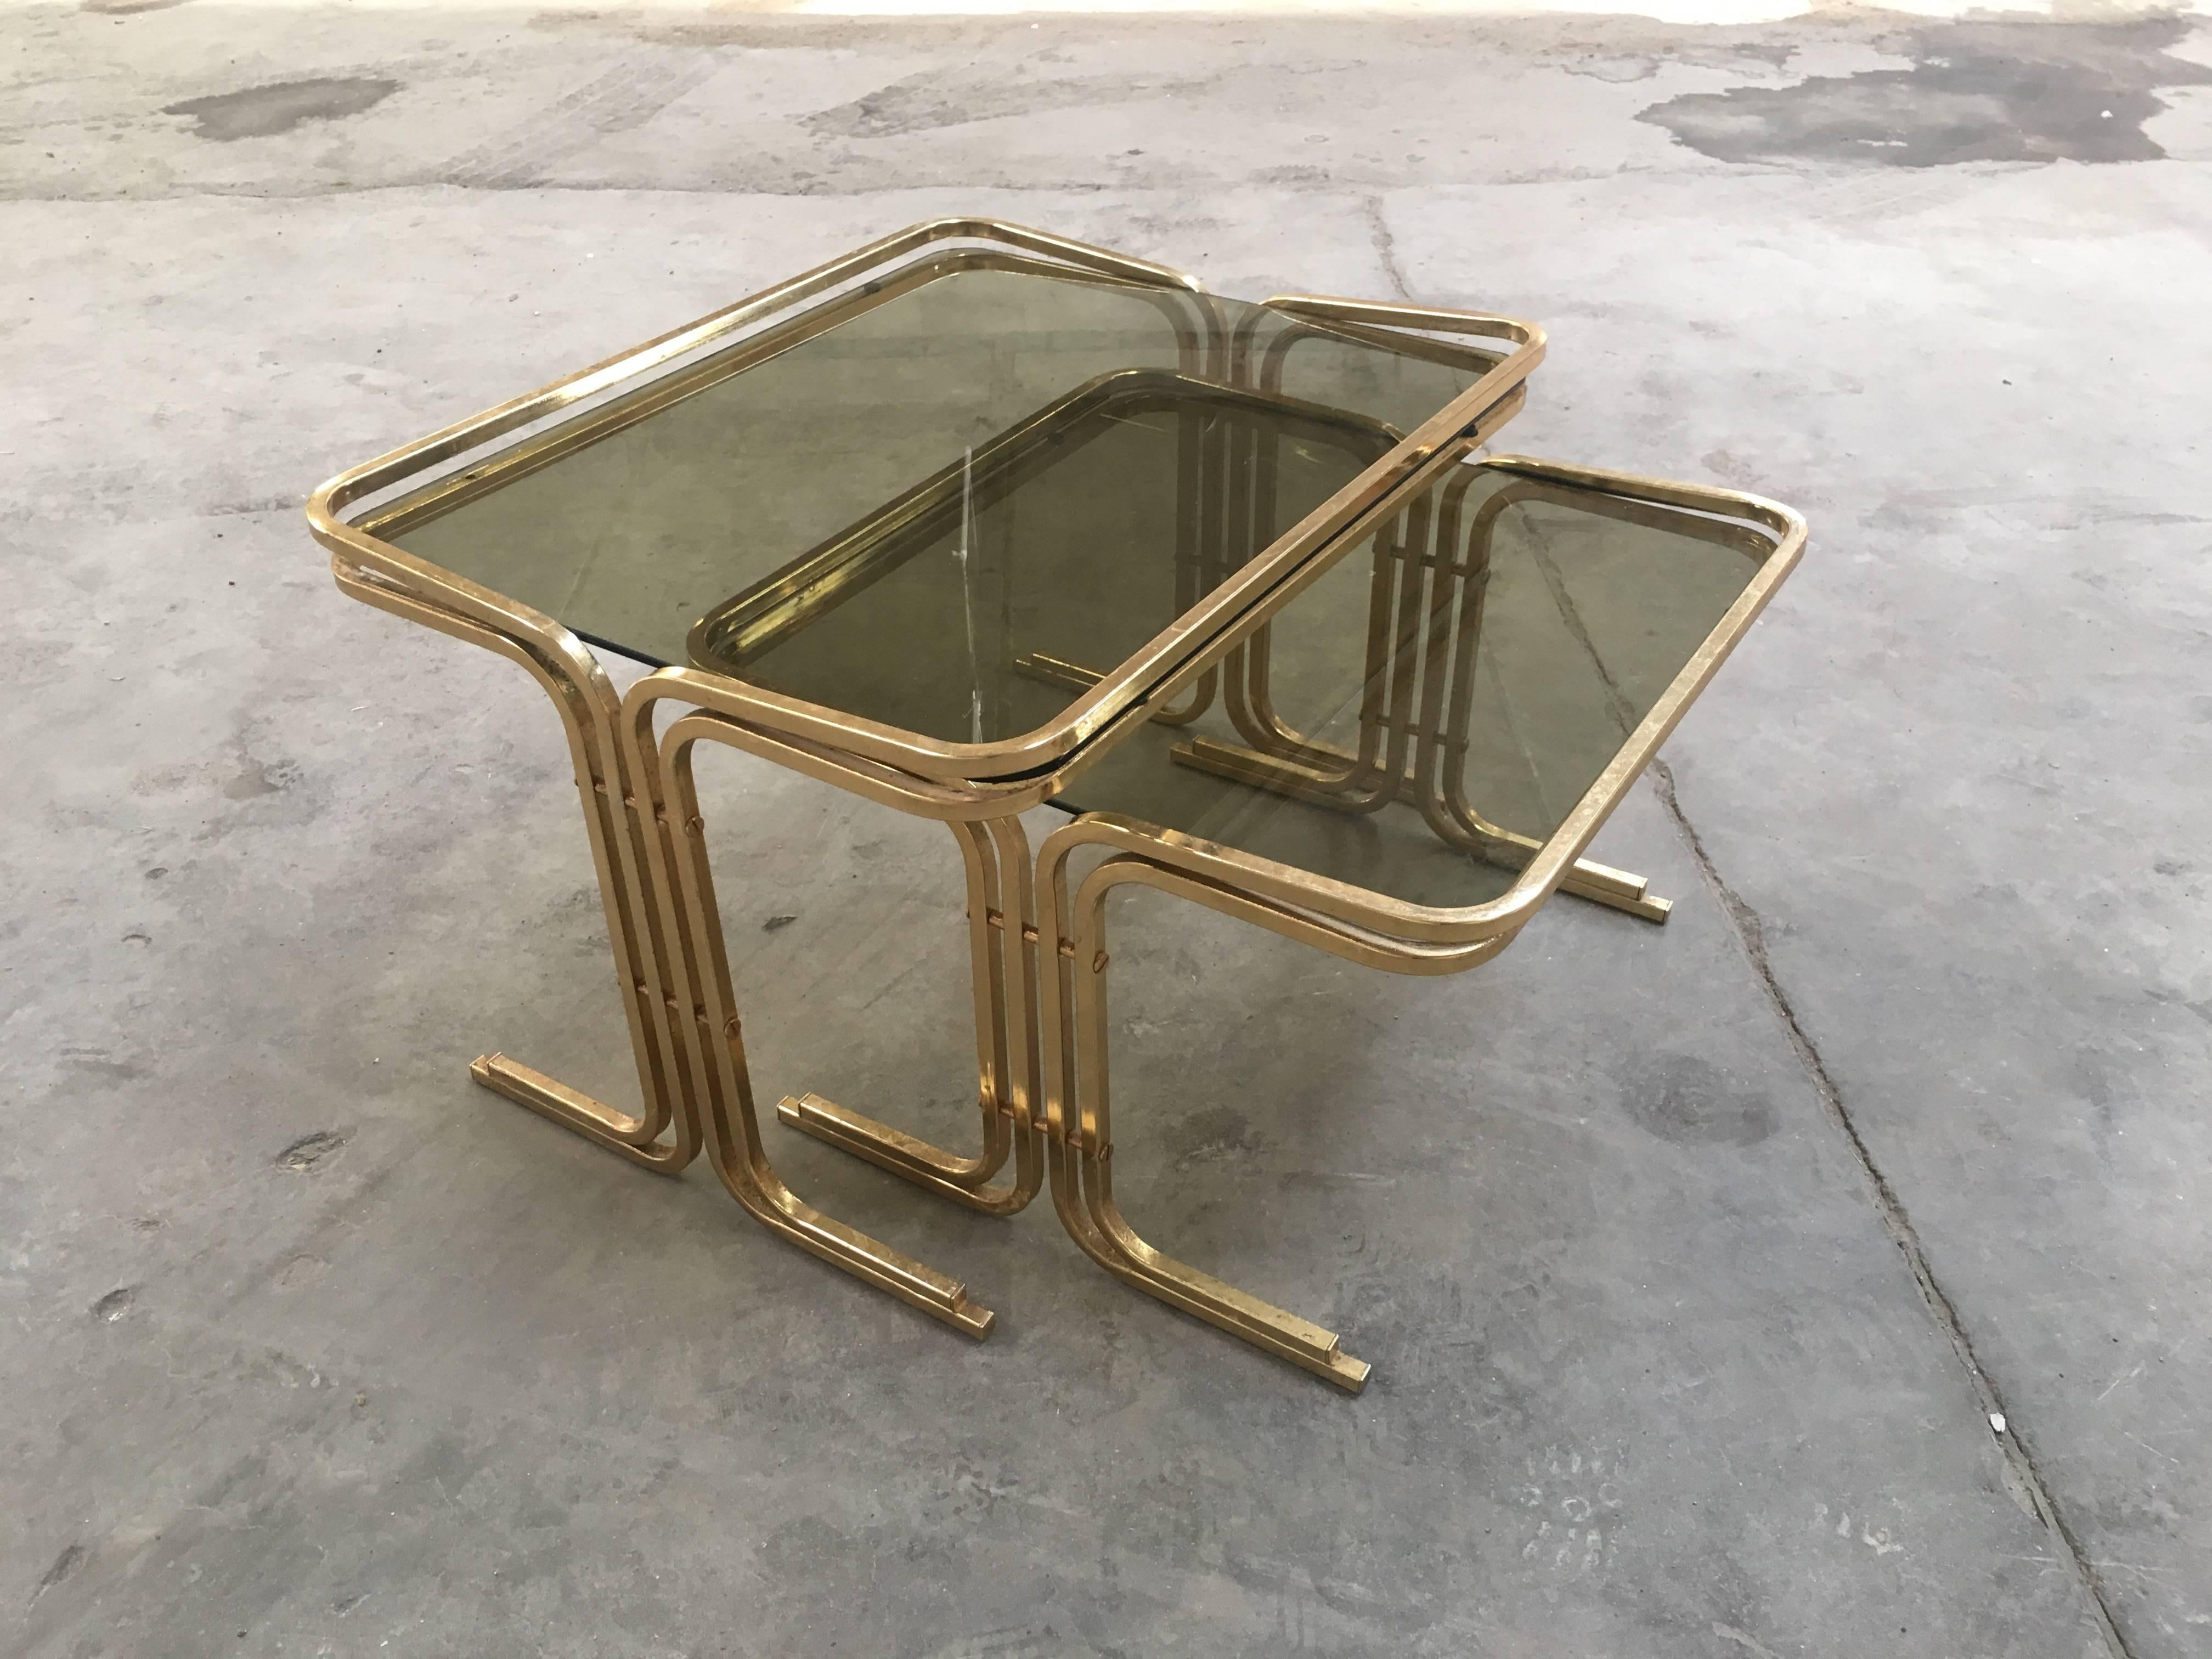 Set of two Italian brass or gilt metal nesting table with smoked glass top from 1970s
Measurements:
small cm 48 x 48 x H 33
big cm 48 x 60 x H 39
Very good conditions. Wear consist with age and use.
        